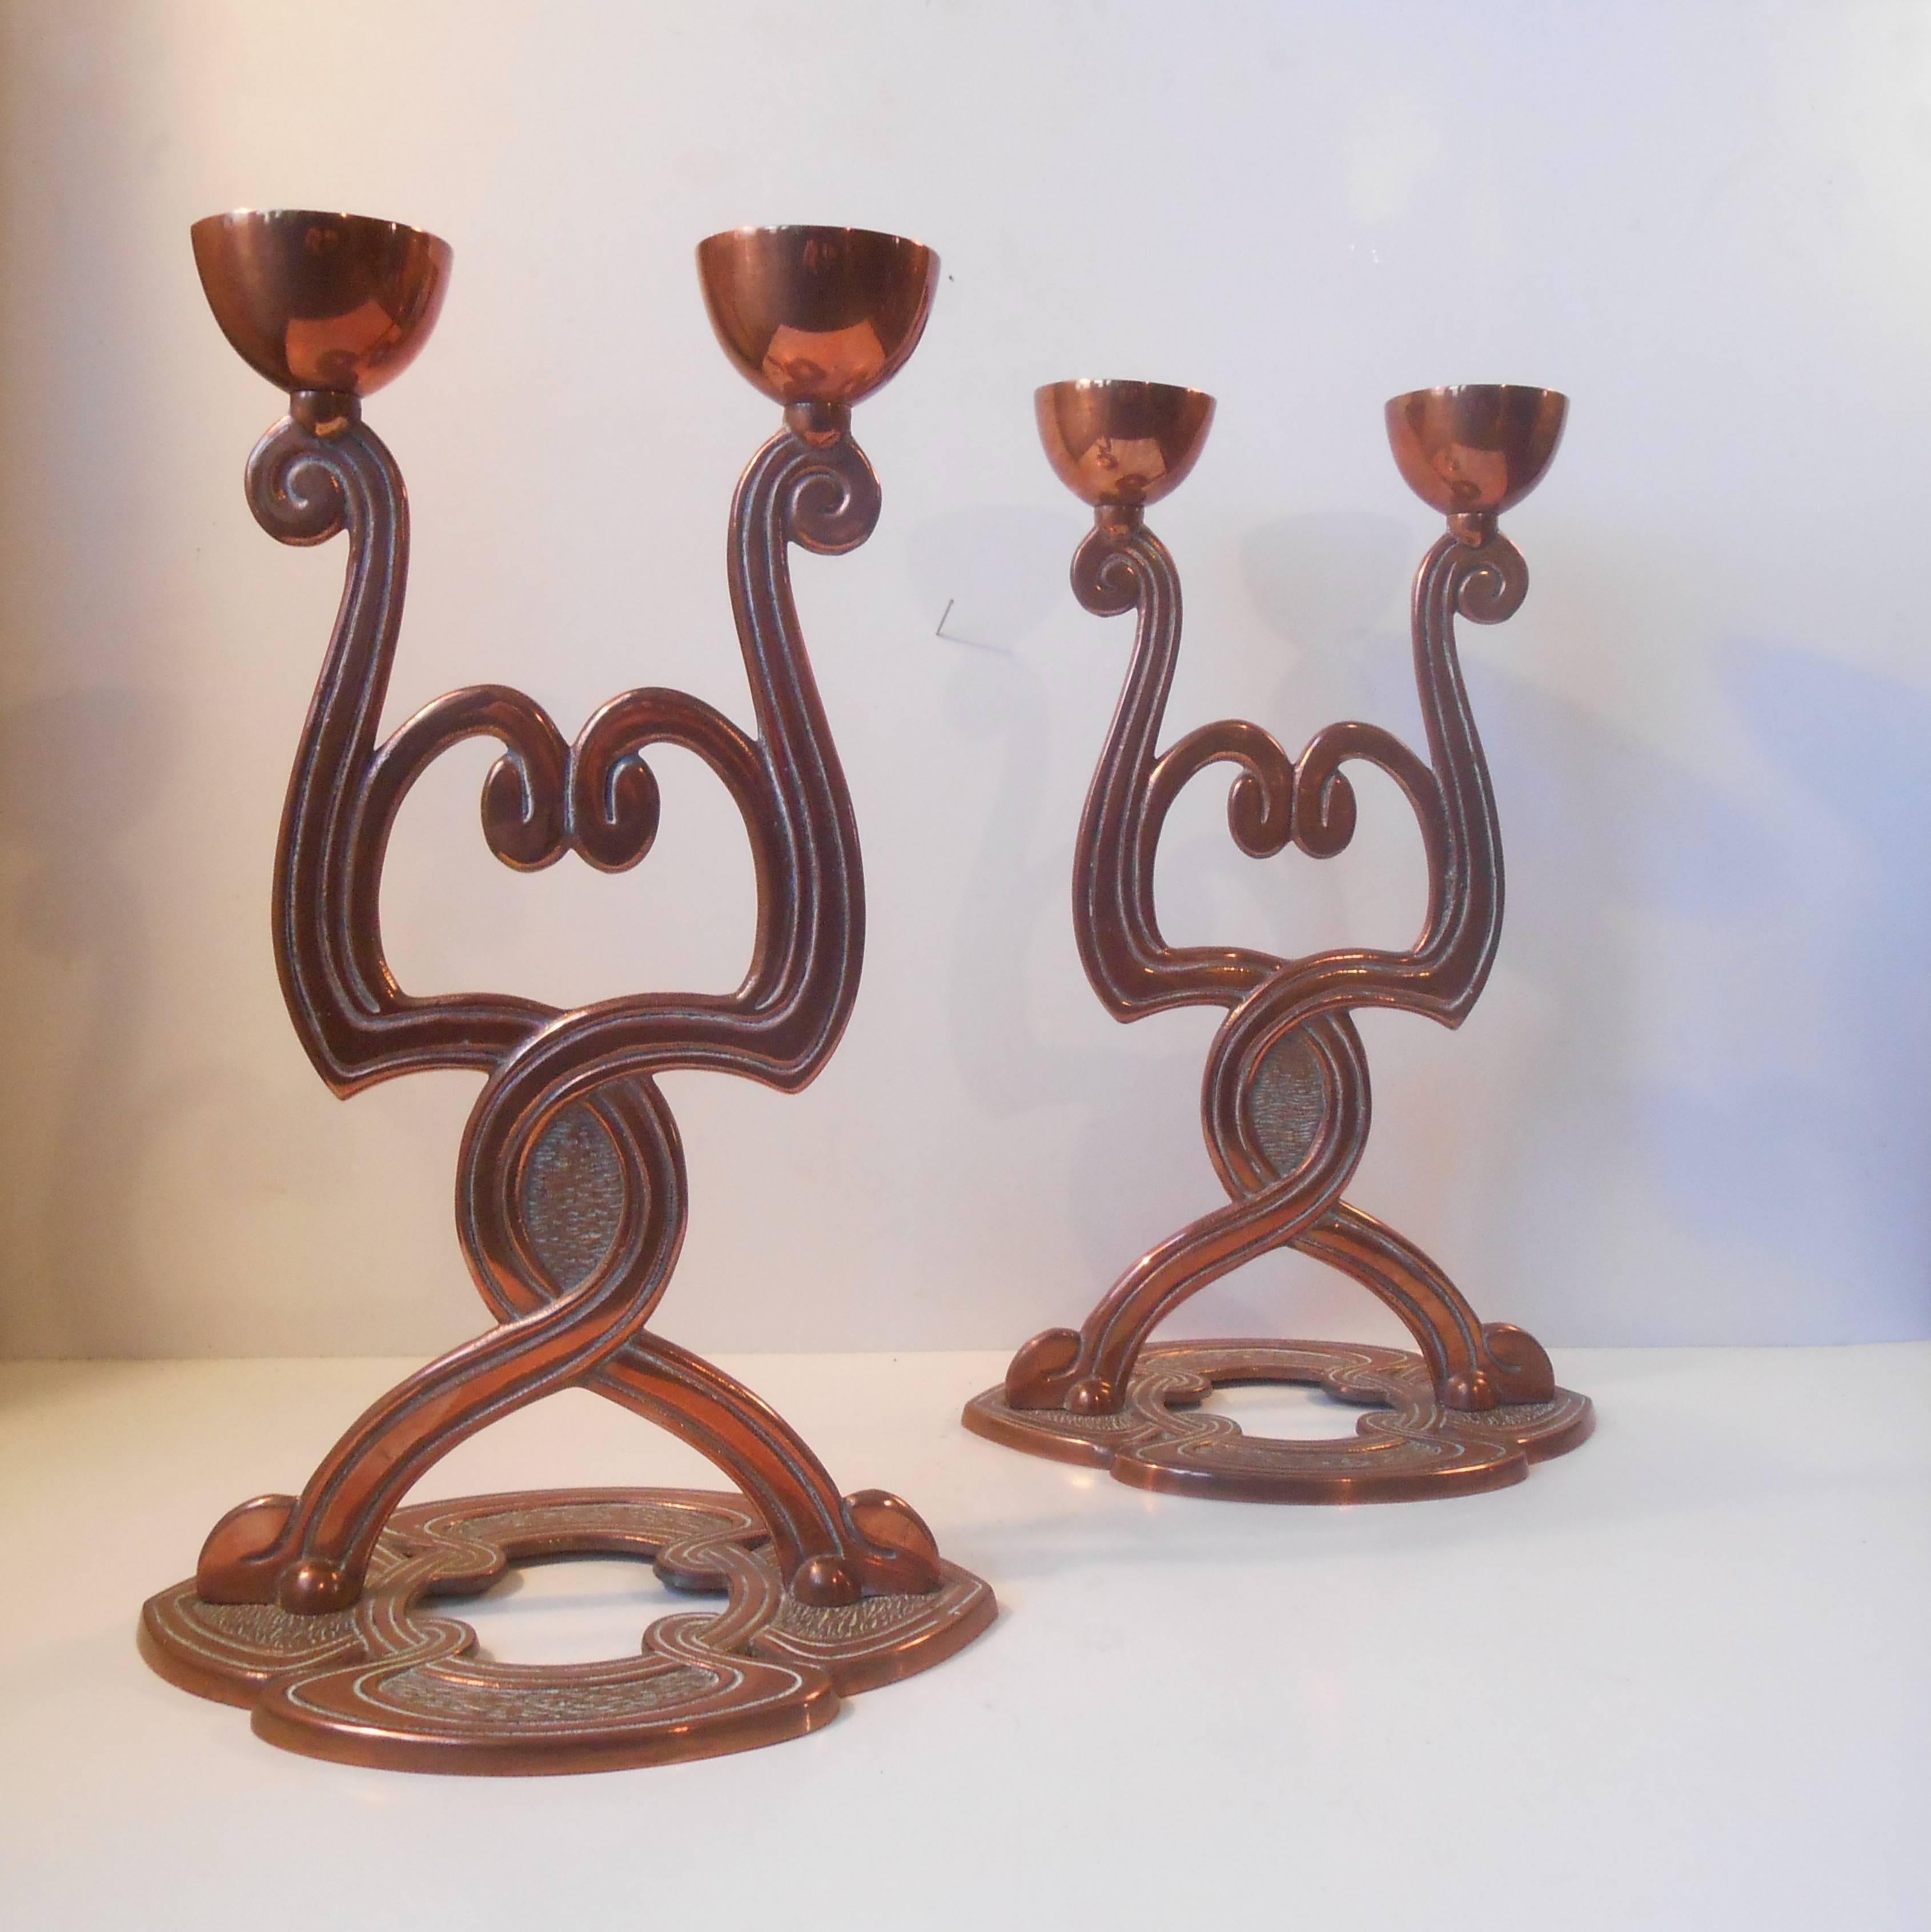 Exquisite period detailing on this pair of copper twin - candleholders. Typical elongated organic shapes with smooth curves and age consistent patina. The style is reminiscent to Thorvald Bindesboll. Height 13.5 inches. The price is for the pair.